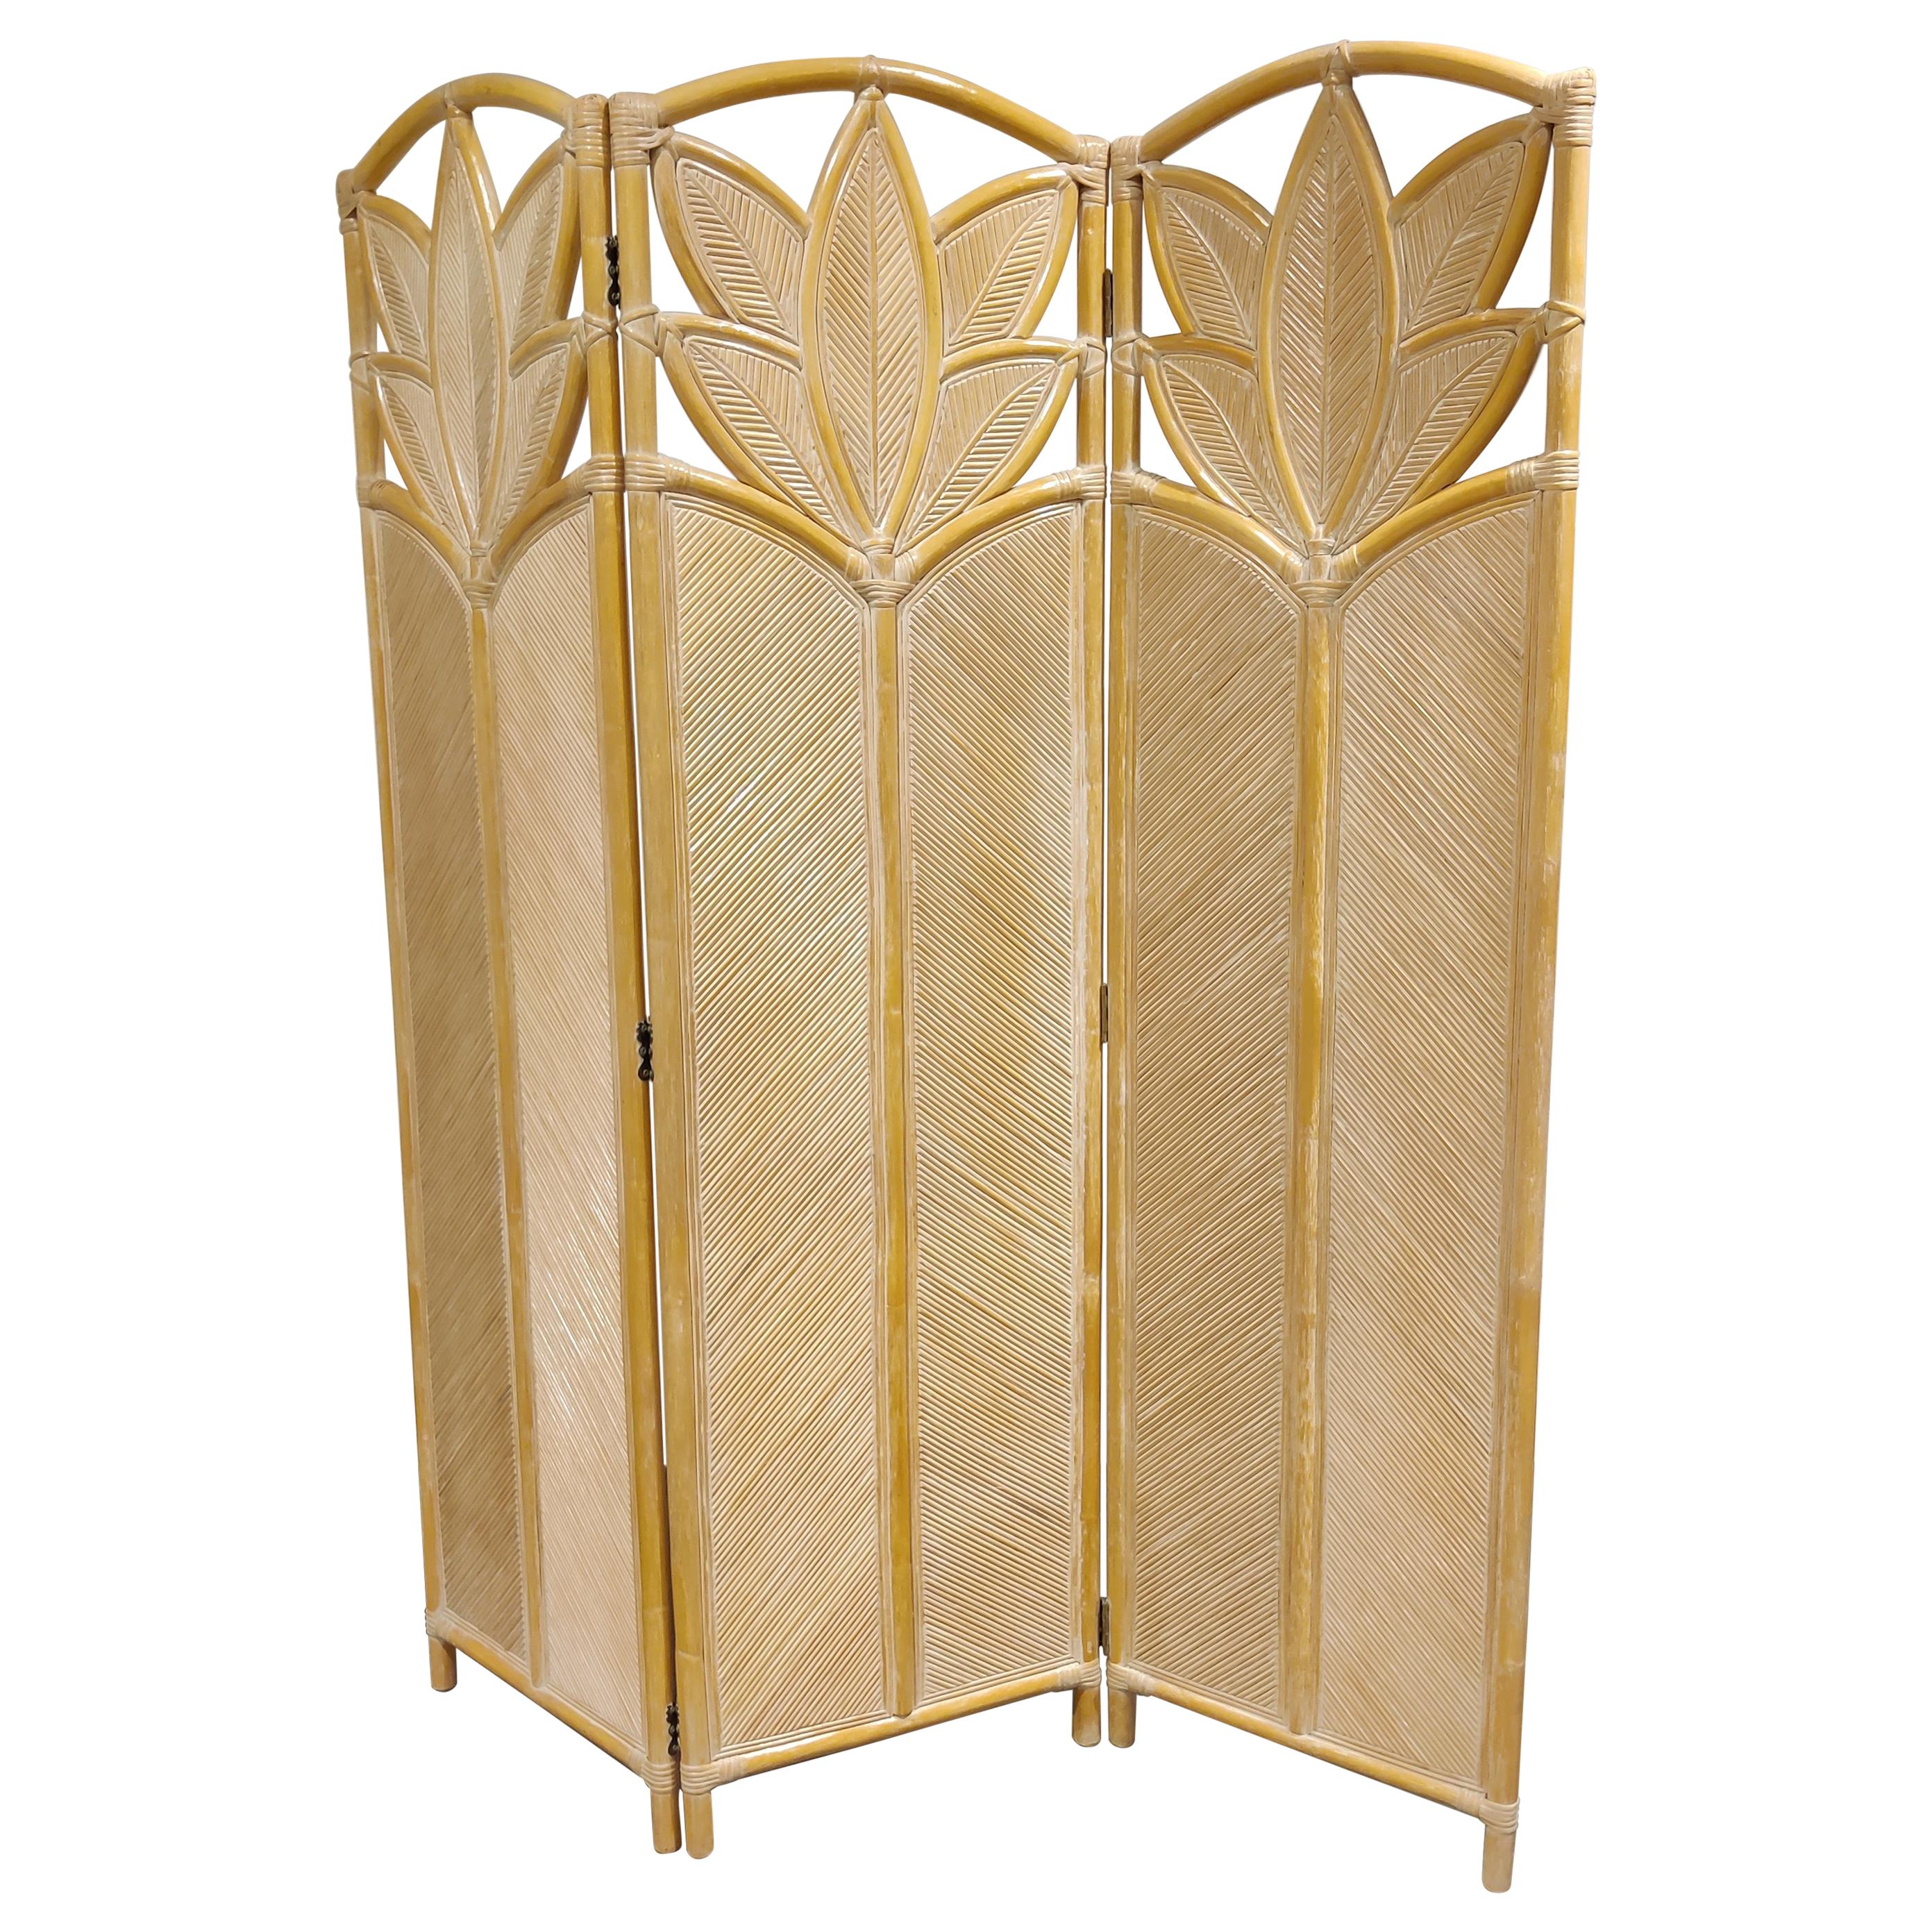 Vintage Bamboo Room Divider or Folding Screen, 1970s